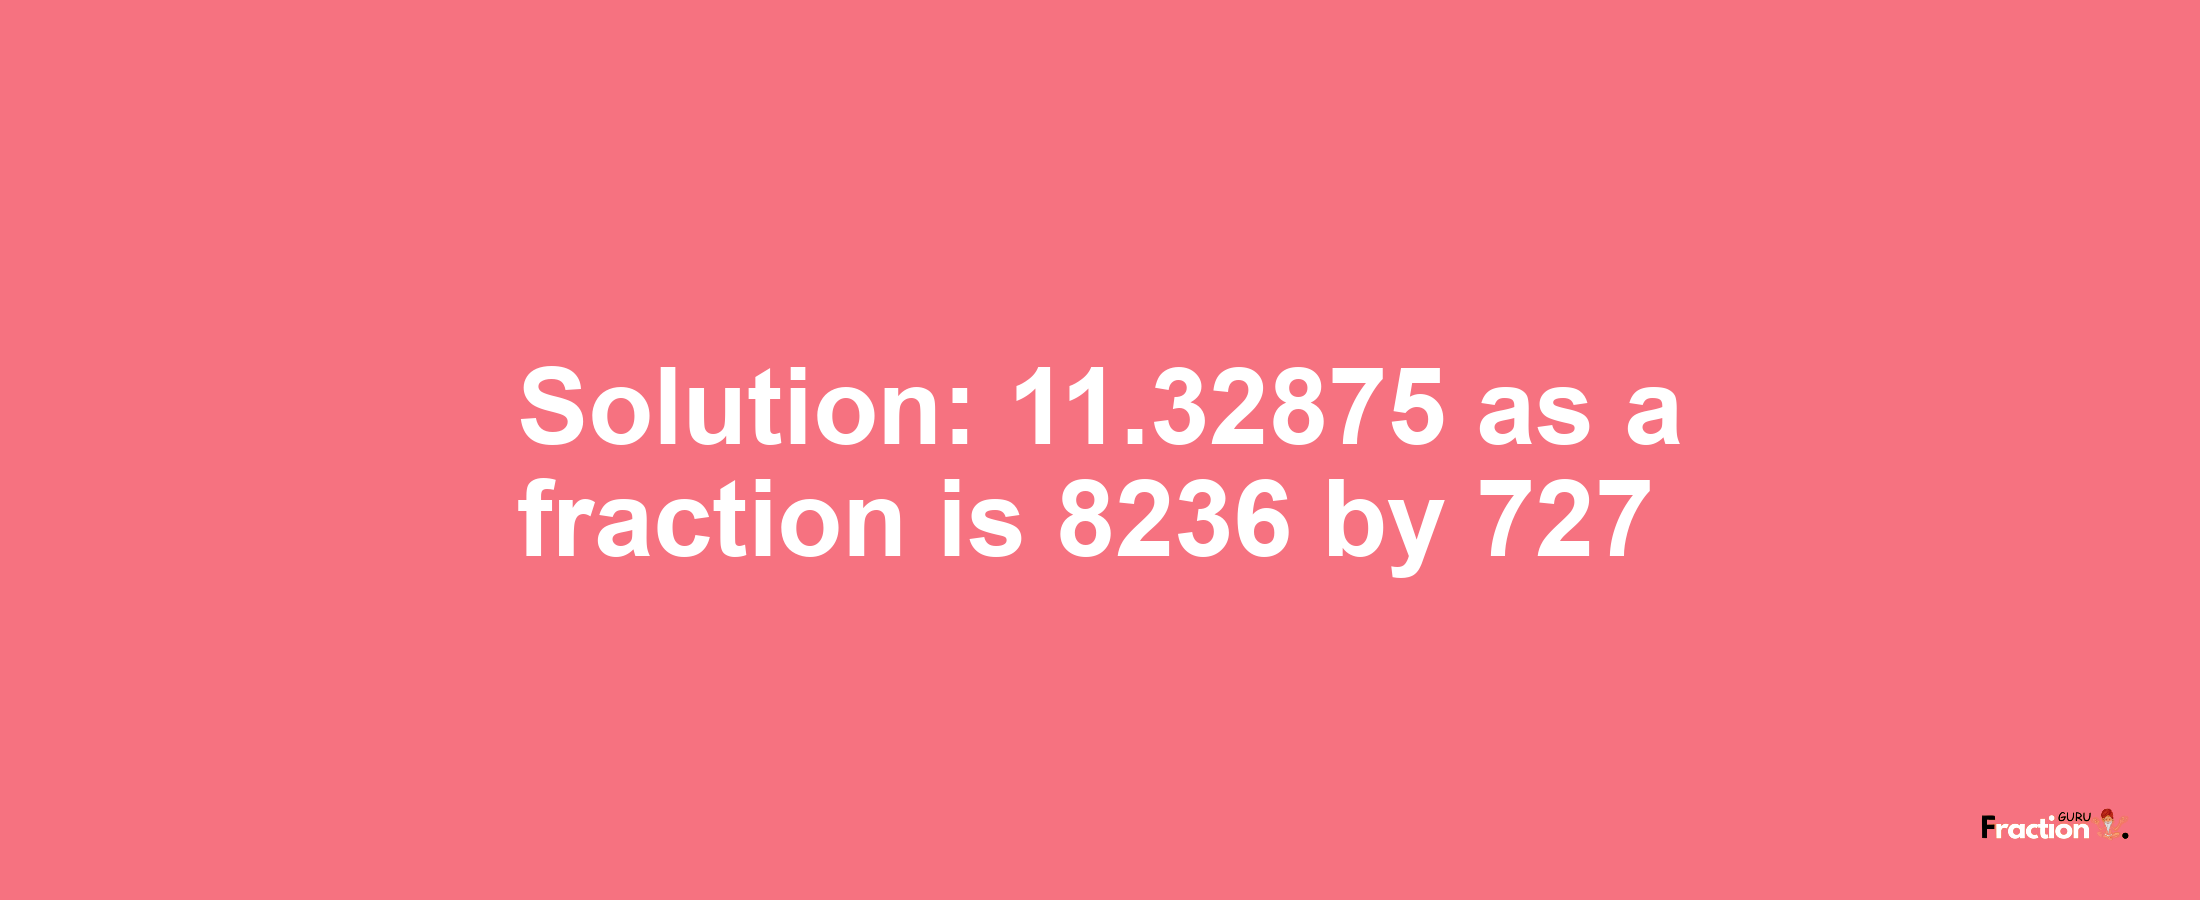 Solution:11.32875 as a fraction is 8236/727